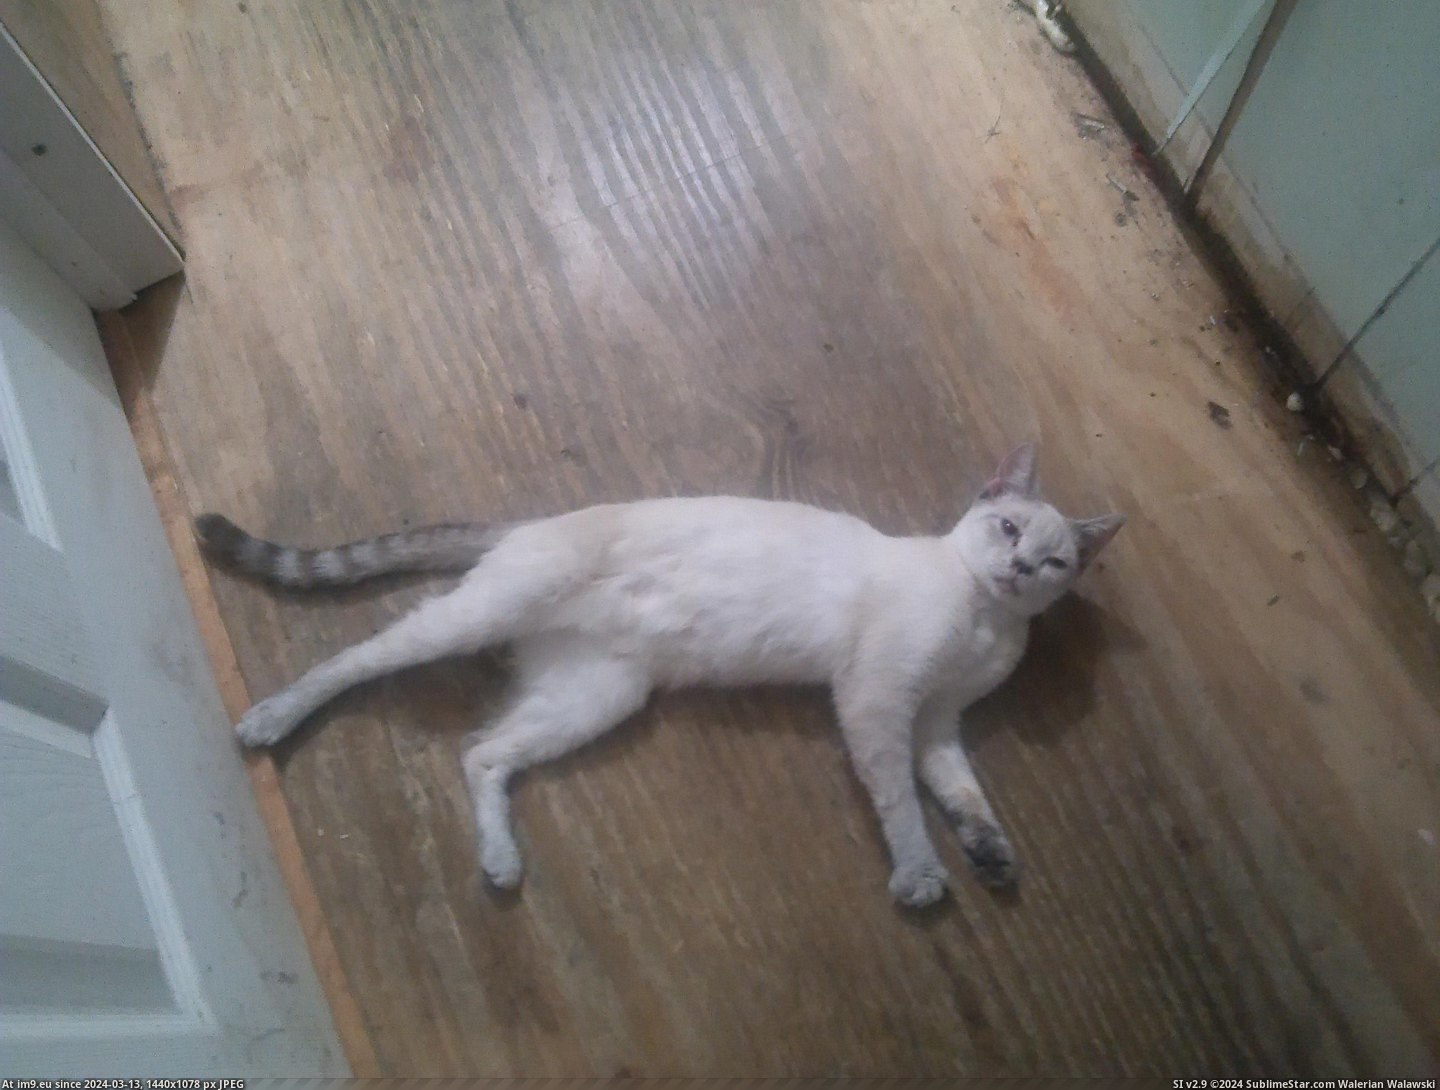 #Cats #Likes #Door #Stretching #Meowing #Sitting #Bedroom #Snowy [Cats] Snowy likes sitting outside of my bedroom door, meowing and stretching at the door until I open the door 8 Pic. (Изображение из альбом My r/CATS favs))